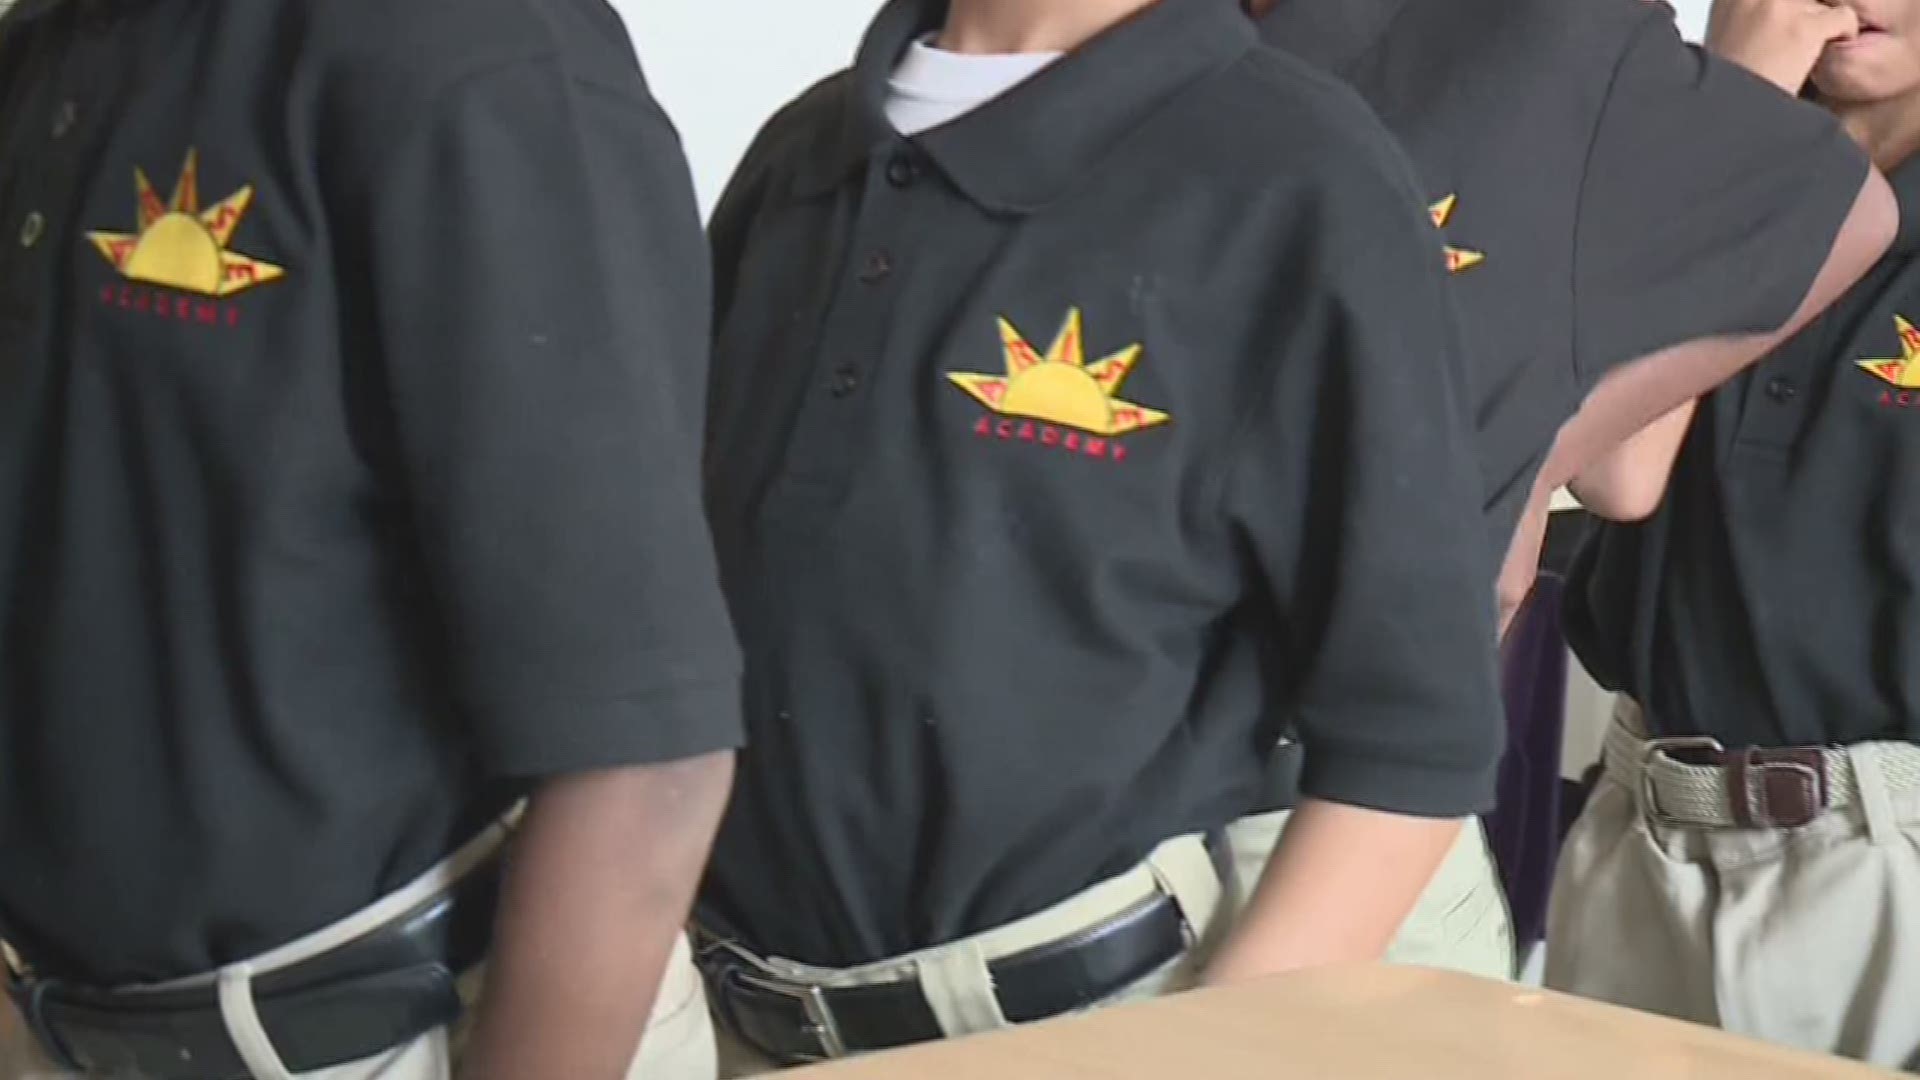 Some families struggle to provide uniforms for students